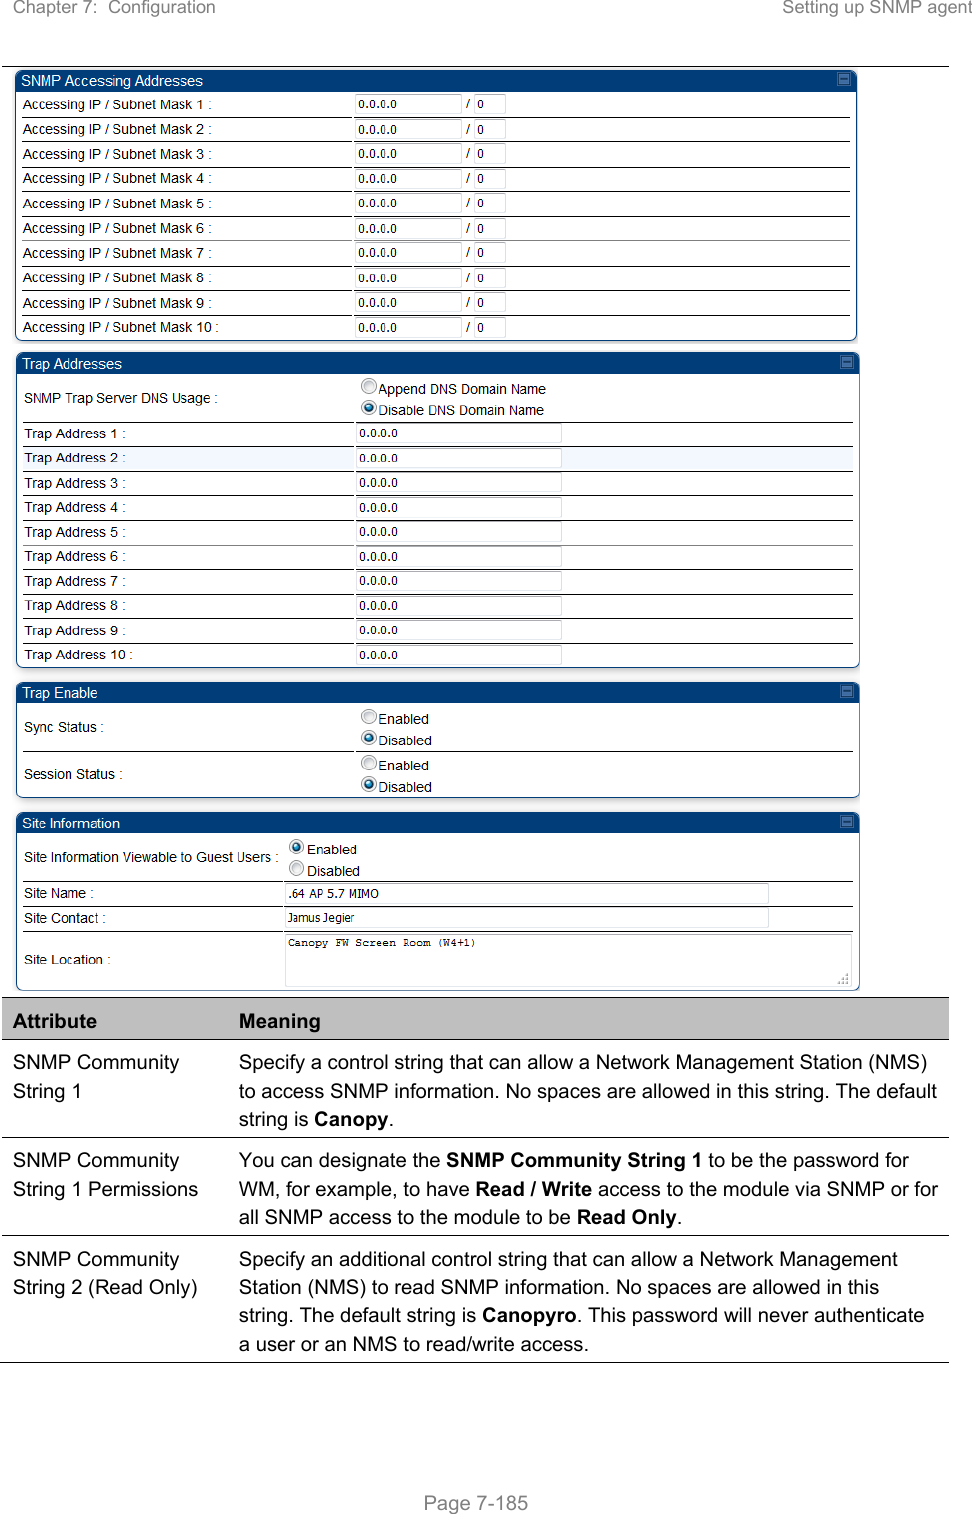 Chapter 7:  Configuration  Setting up SNMP agent   Page 7-185   Attribute  Meaning SNMP Community String 1 Specify a control string that can allow a Network Management Station (NMS) to access SNMP information. No spaces are allowed in this string. The default string is Canopy.  SNMP Community String 1 Permissions You can designate the SNMP Community String 1 to be the password for WM, for example, to have Read / Write access to the module via SNMP or for all SNMP access to the module to be Read Only. SNMP Community String 2 (Read Only) Specify an additional control string that can allow a Network Management Station (NMS) to read SNMP information. No spaces are allowed in this string. The default string is Canopyro. This password will never authenticate a user or an NMS to read/write access. 